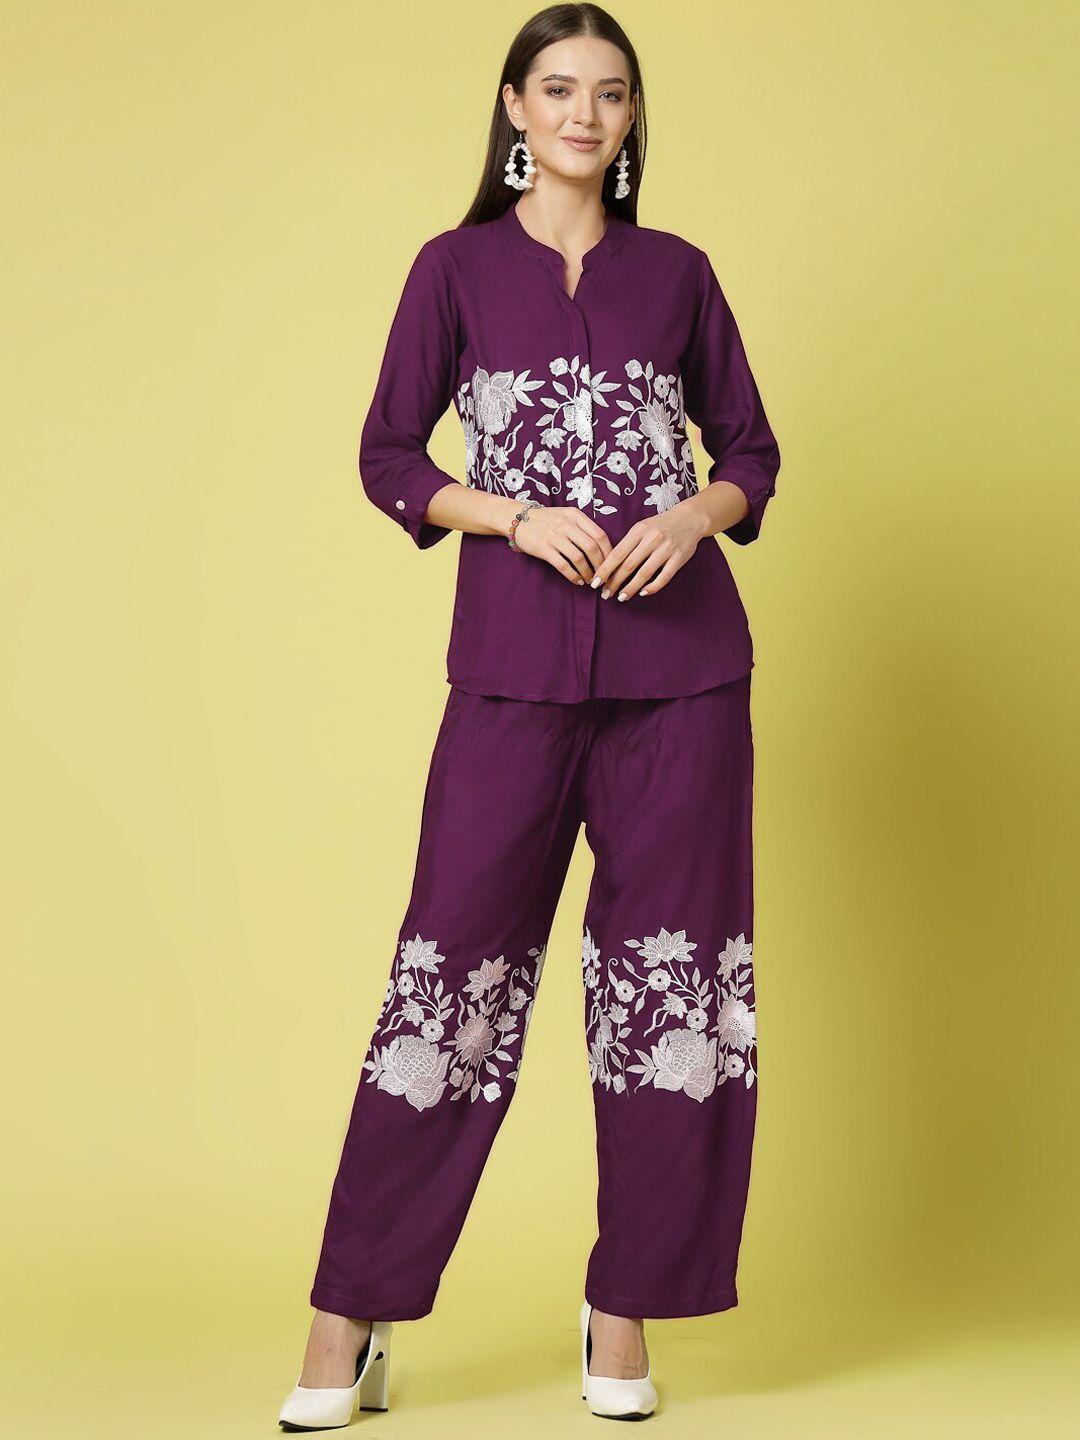 kalini embroidered top with trousers co-ords